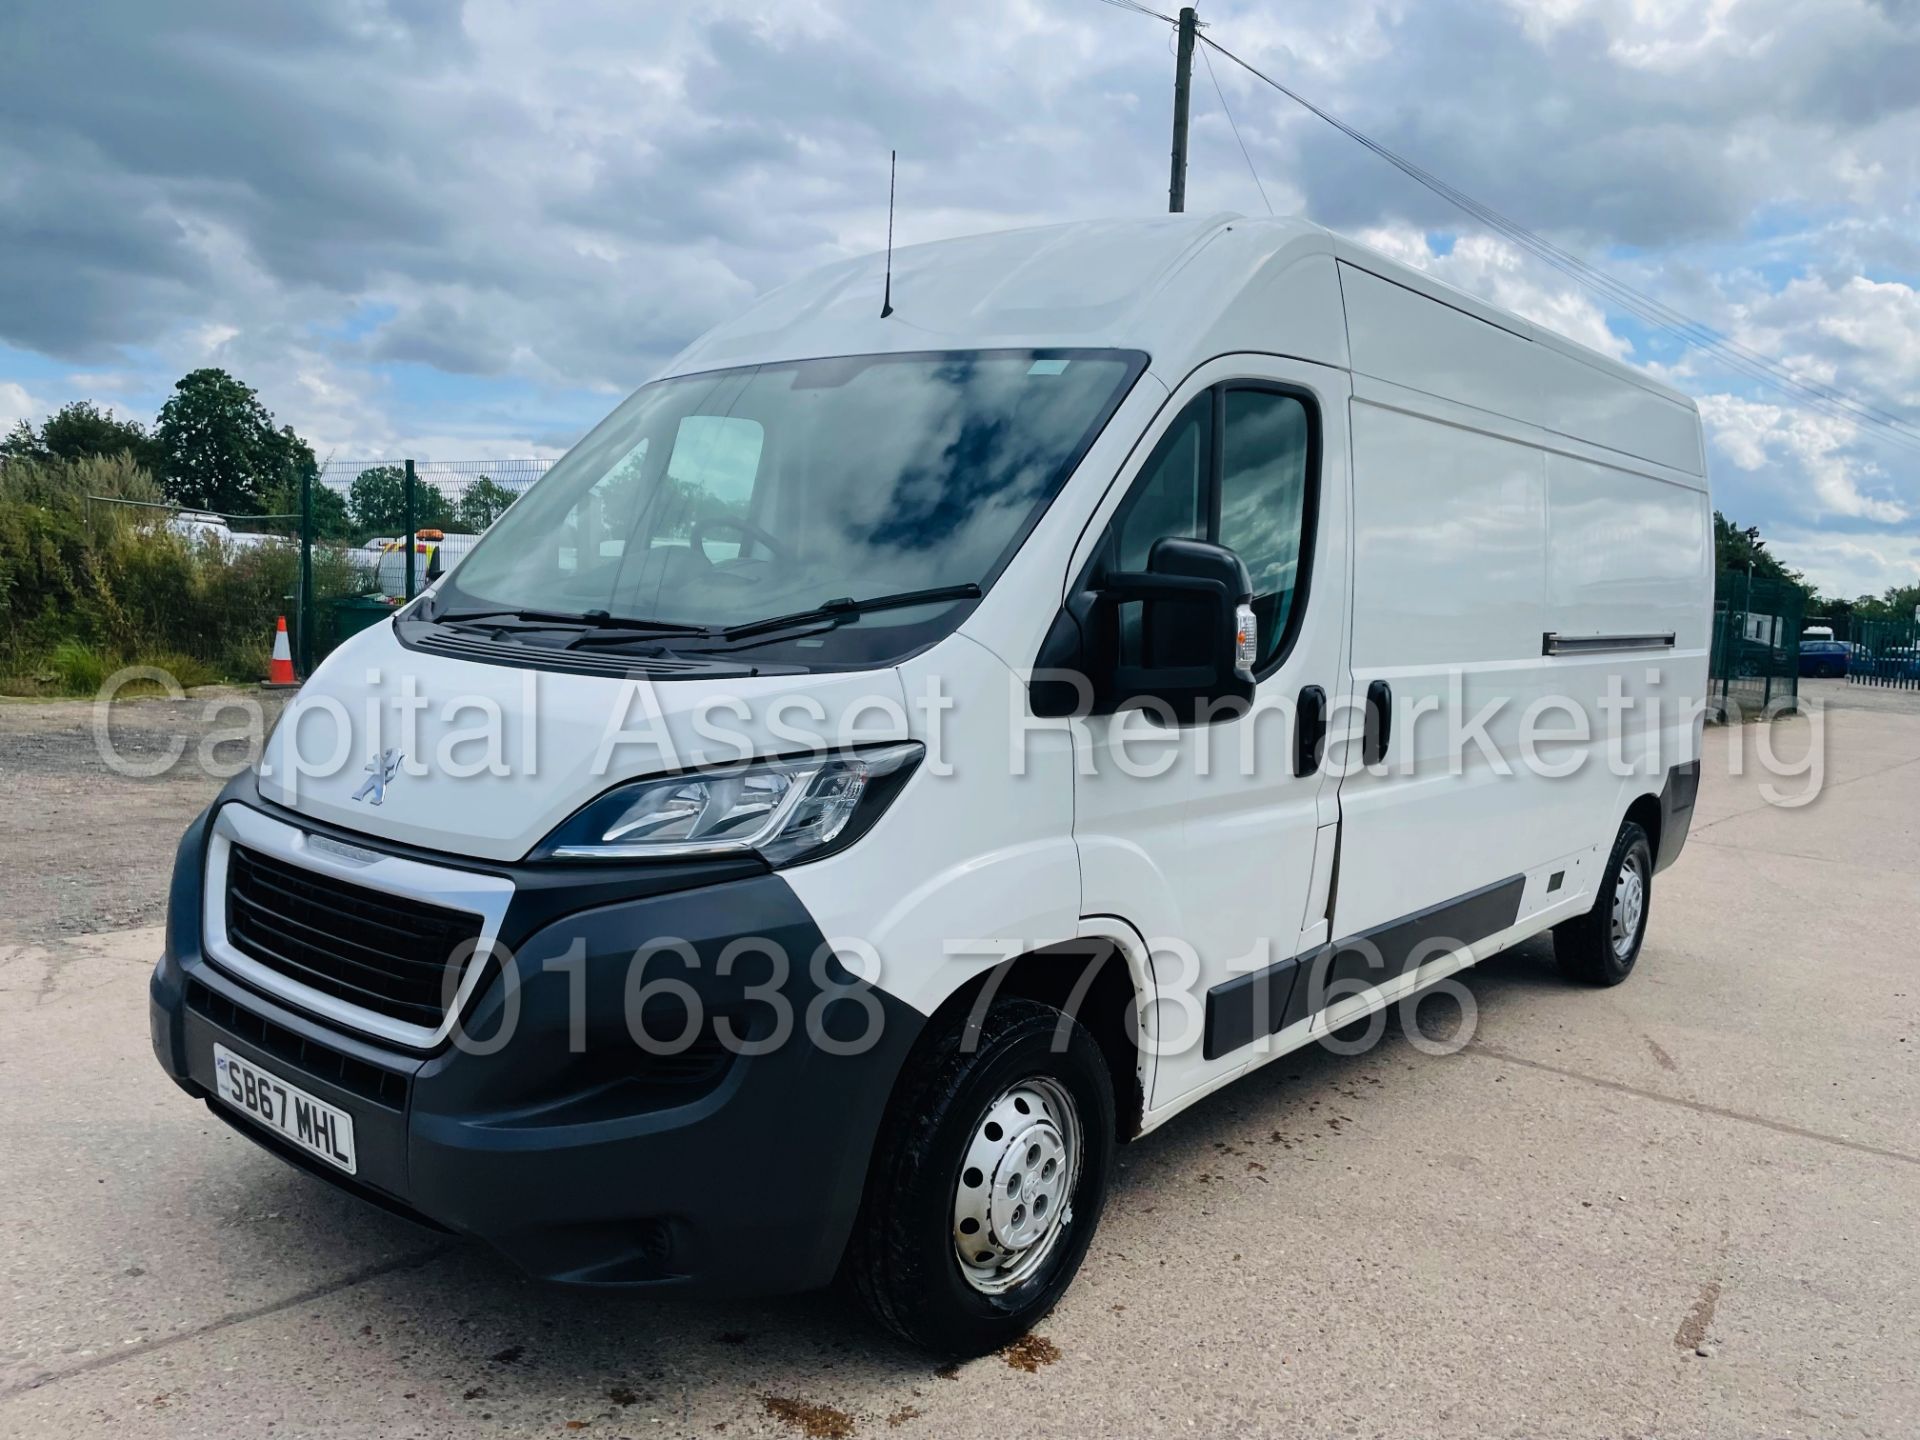 ON SALE PEUGEOT BOXER *PROFESSIONAL* LWB HI-ROOF (2018 - EURO 6) '2.0 BLUE HDI - 6 SPEED' *A/C & NAV - Image 5 of 44